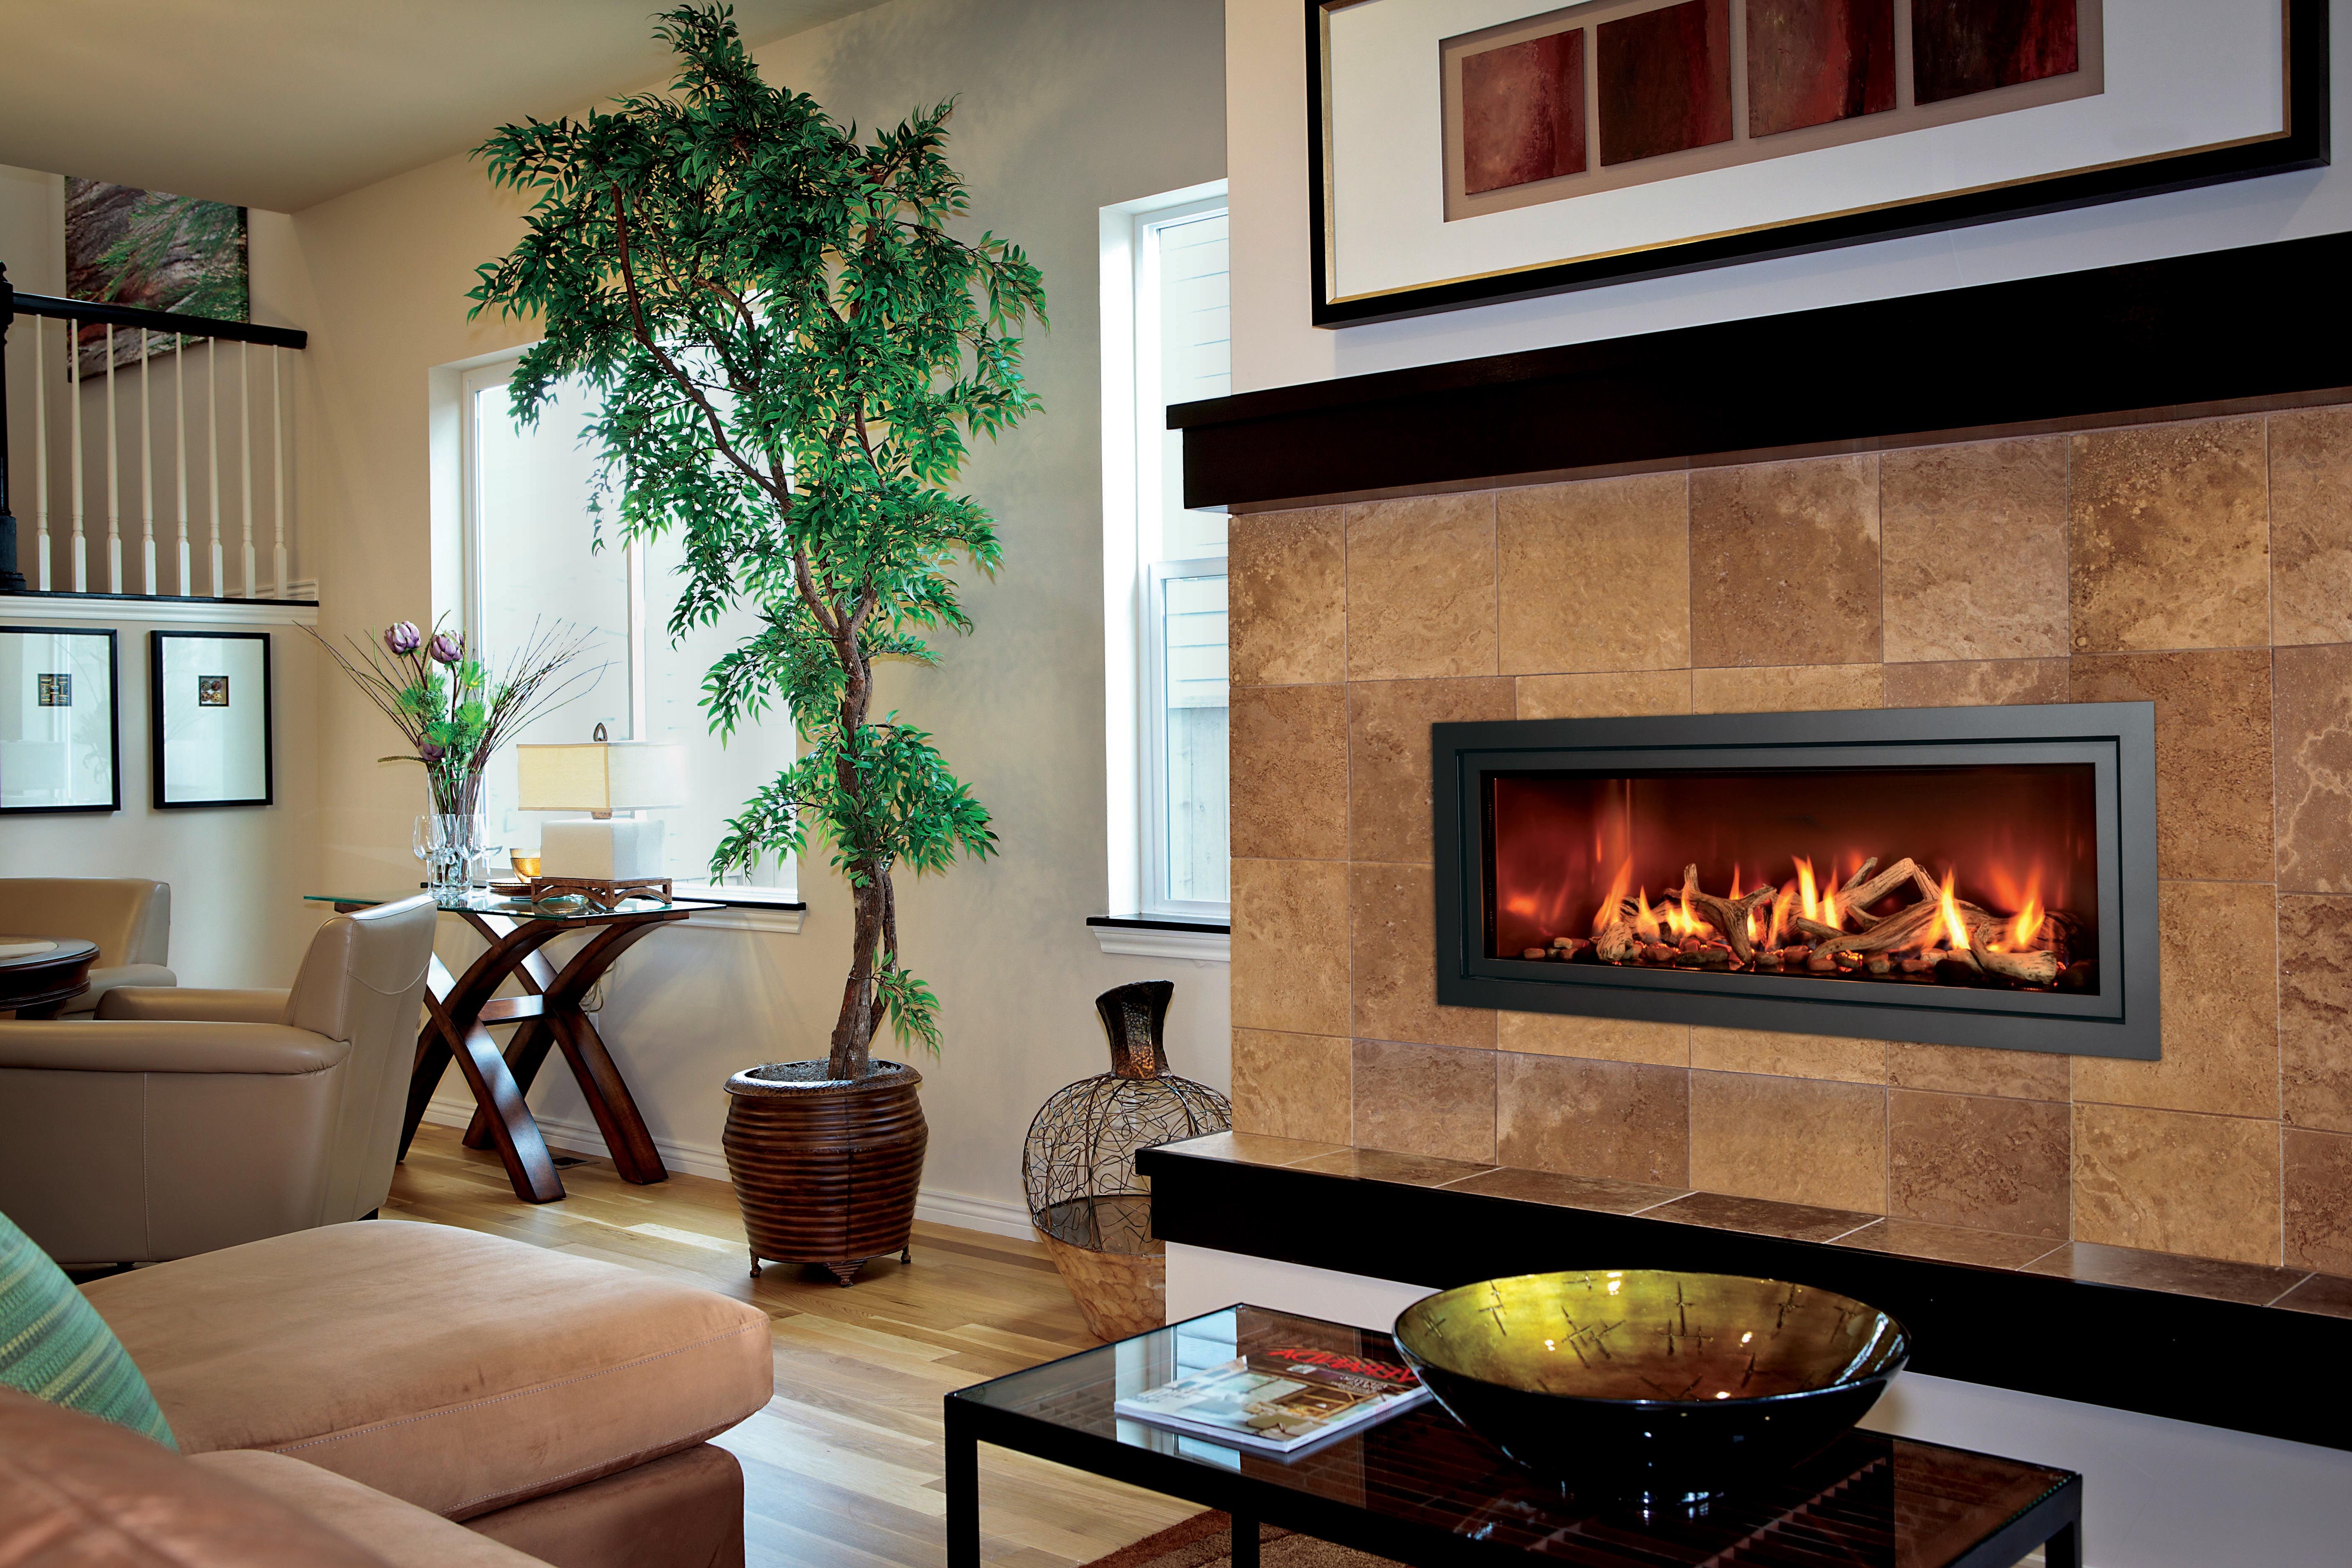 Average Height Of Fireplace Mantel Lovely Just because &quot;modern&quot; is In the Name Doesn T Mean the